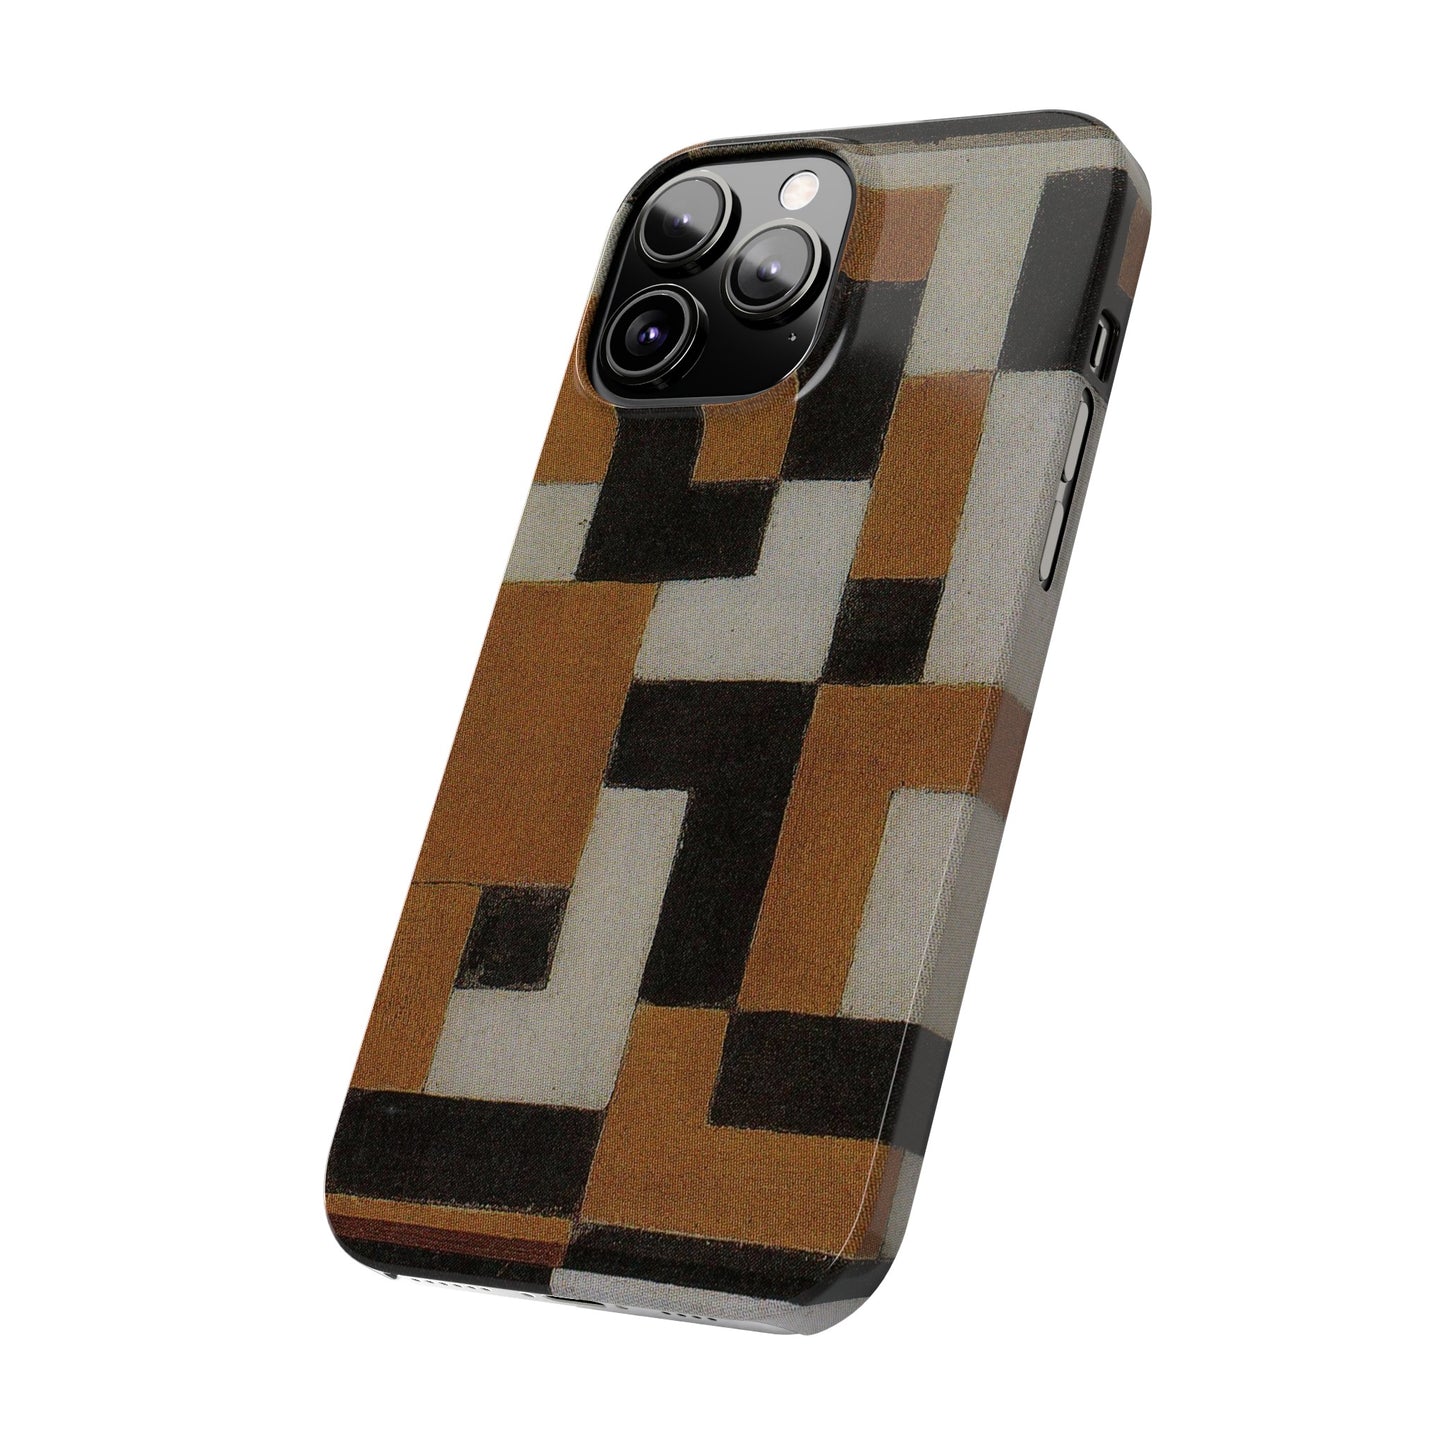 THEO VAN DOESBURG - COMPOSITION (1917 and 1918) - iPHONE SLIM CASE